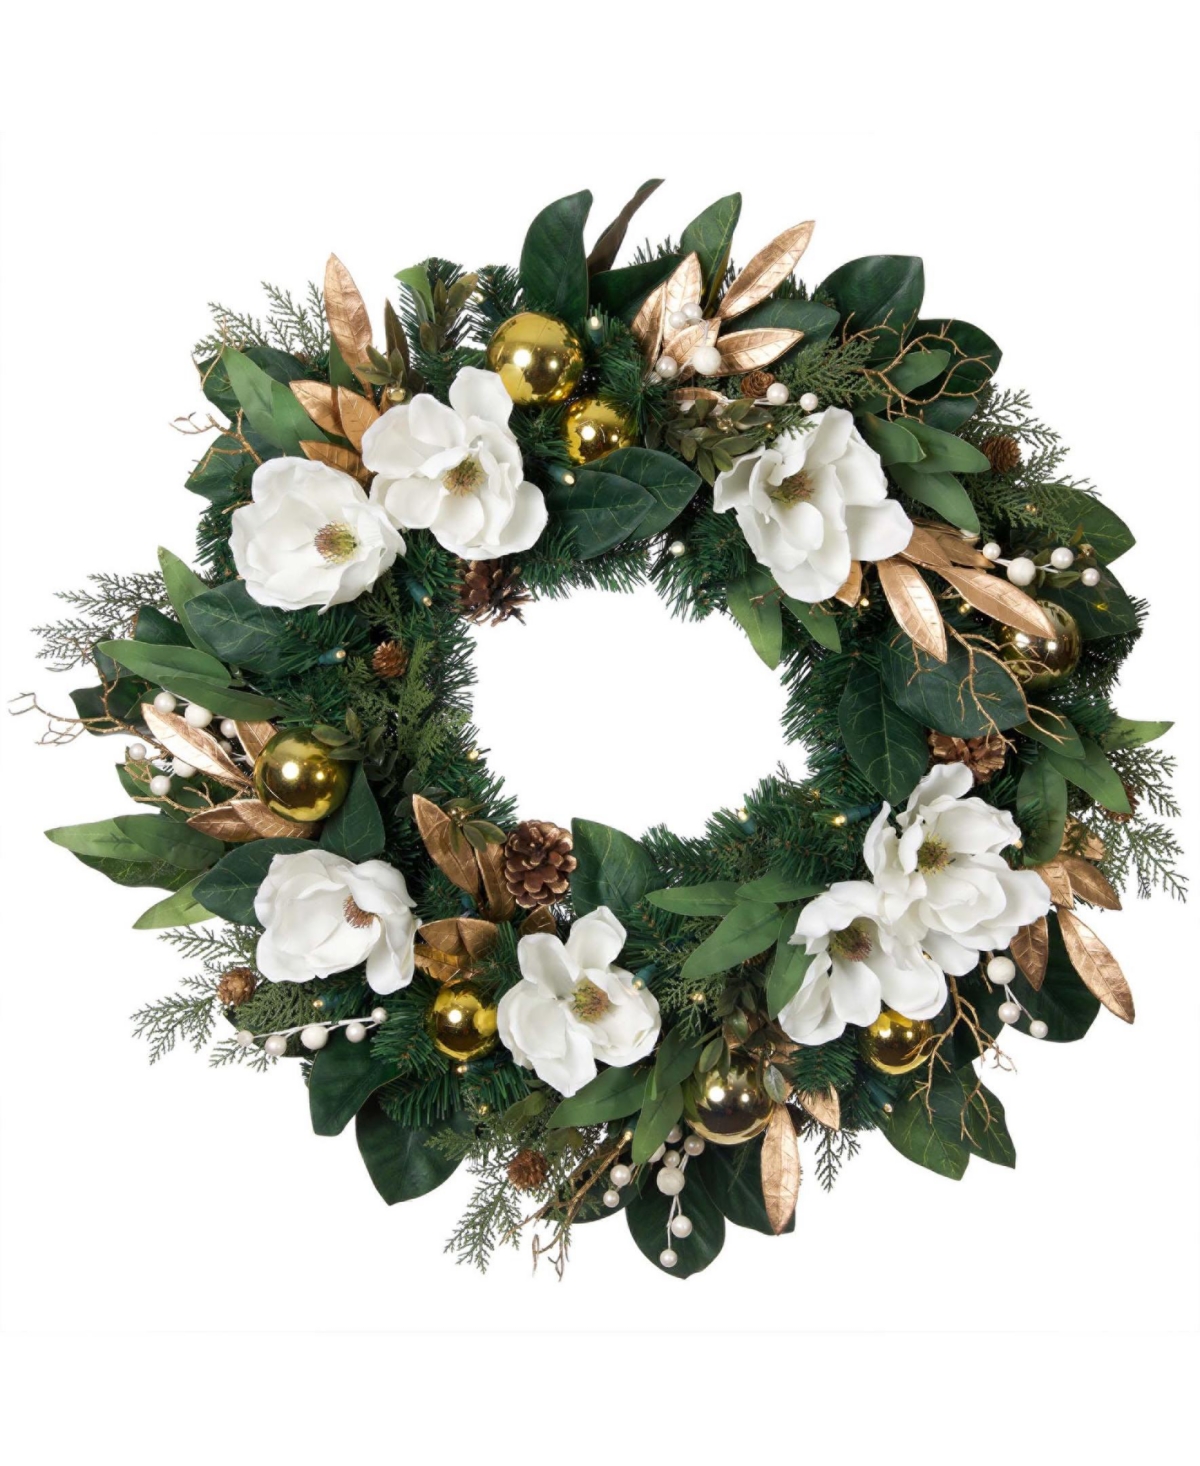 Village Lighting Company 30" Lighted Christmas Wreath, White Gold-tone Magnolia In Assorted